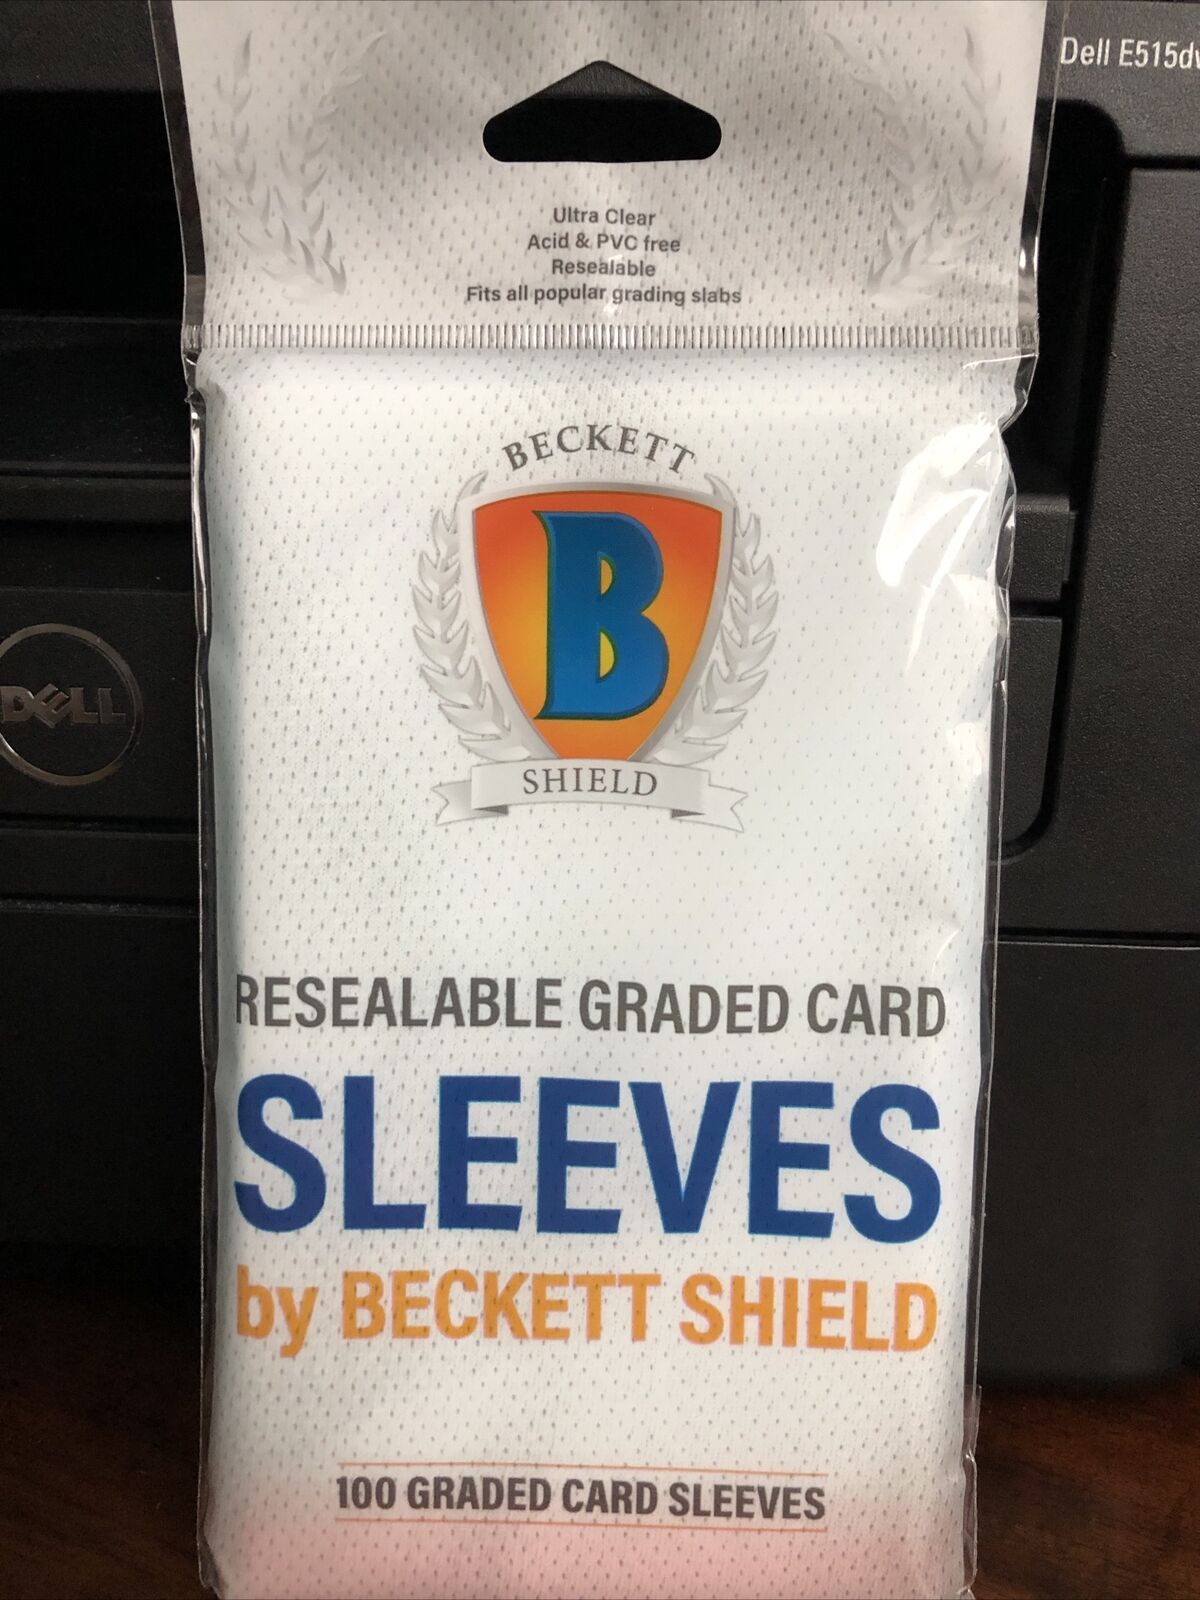 Beckett Shield Resealable Graded Card Sleeves 1 Pack of 100 Sleeves